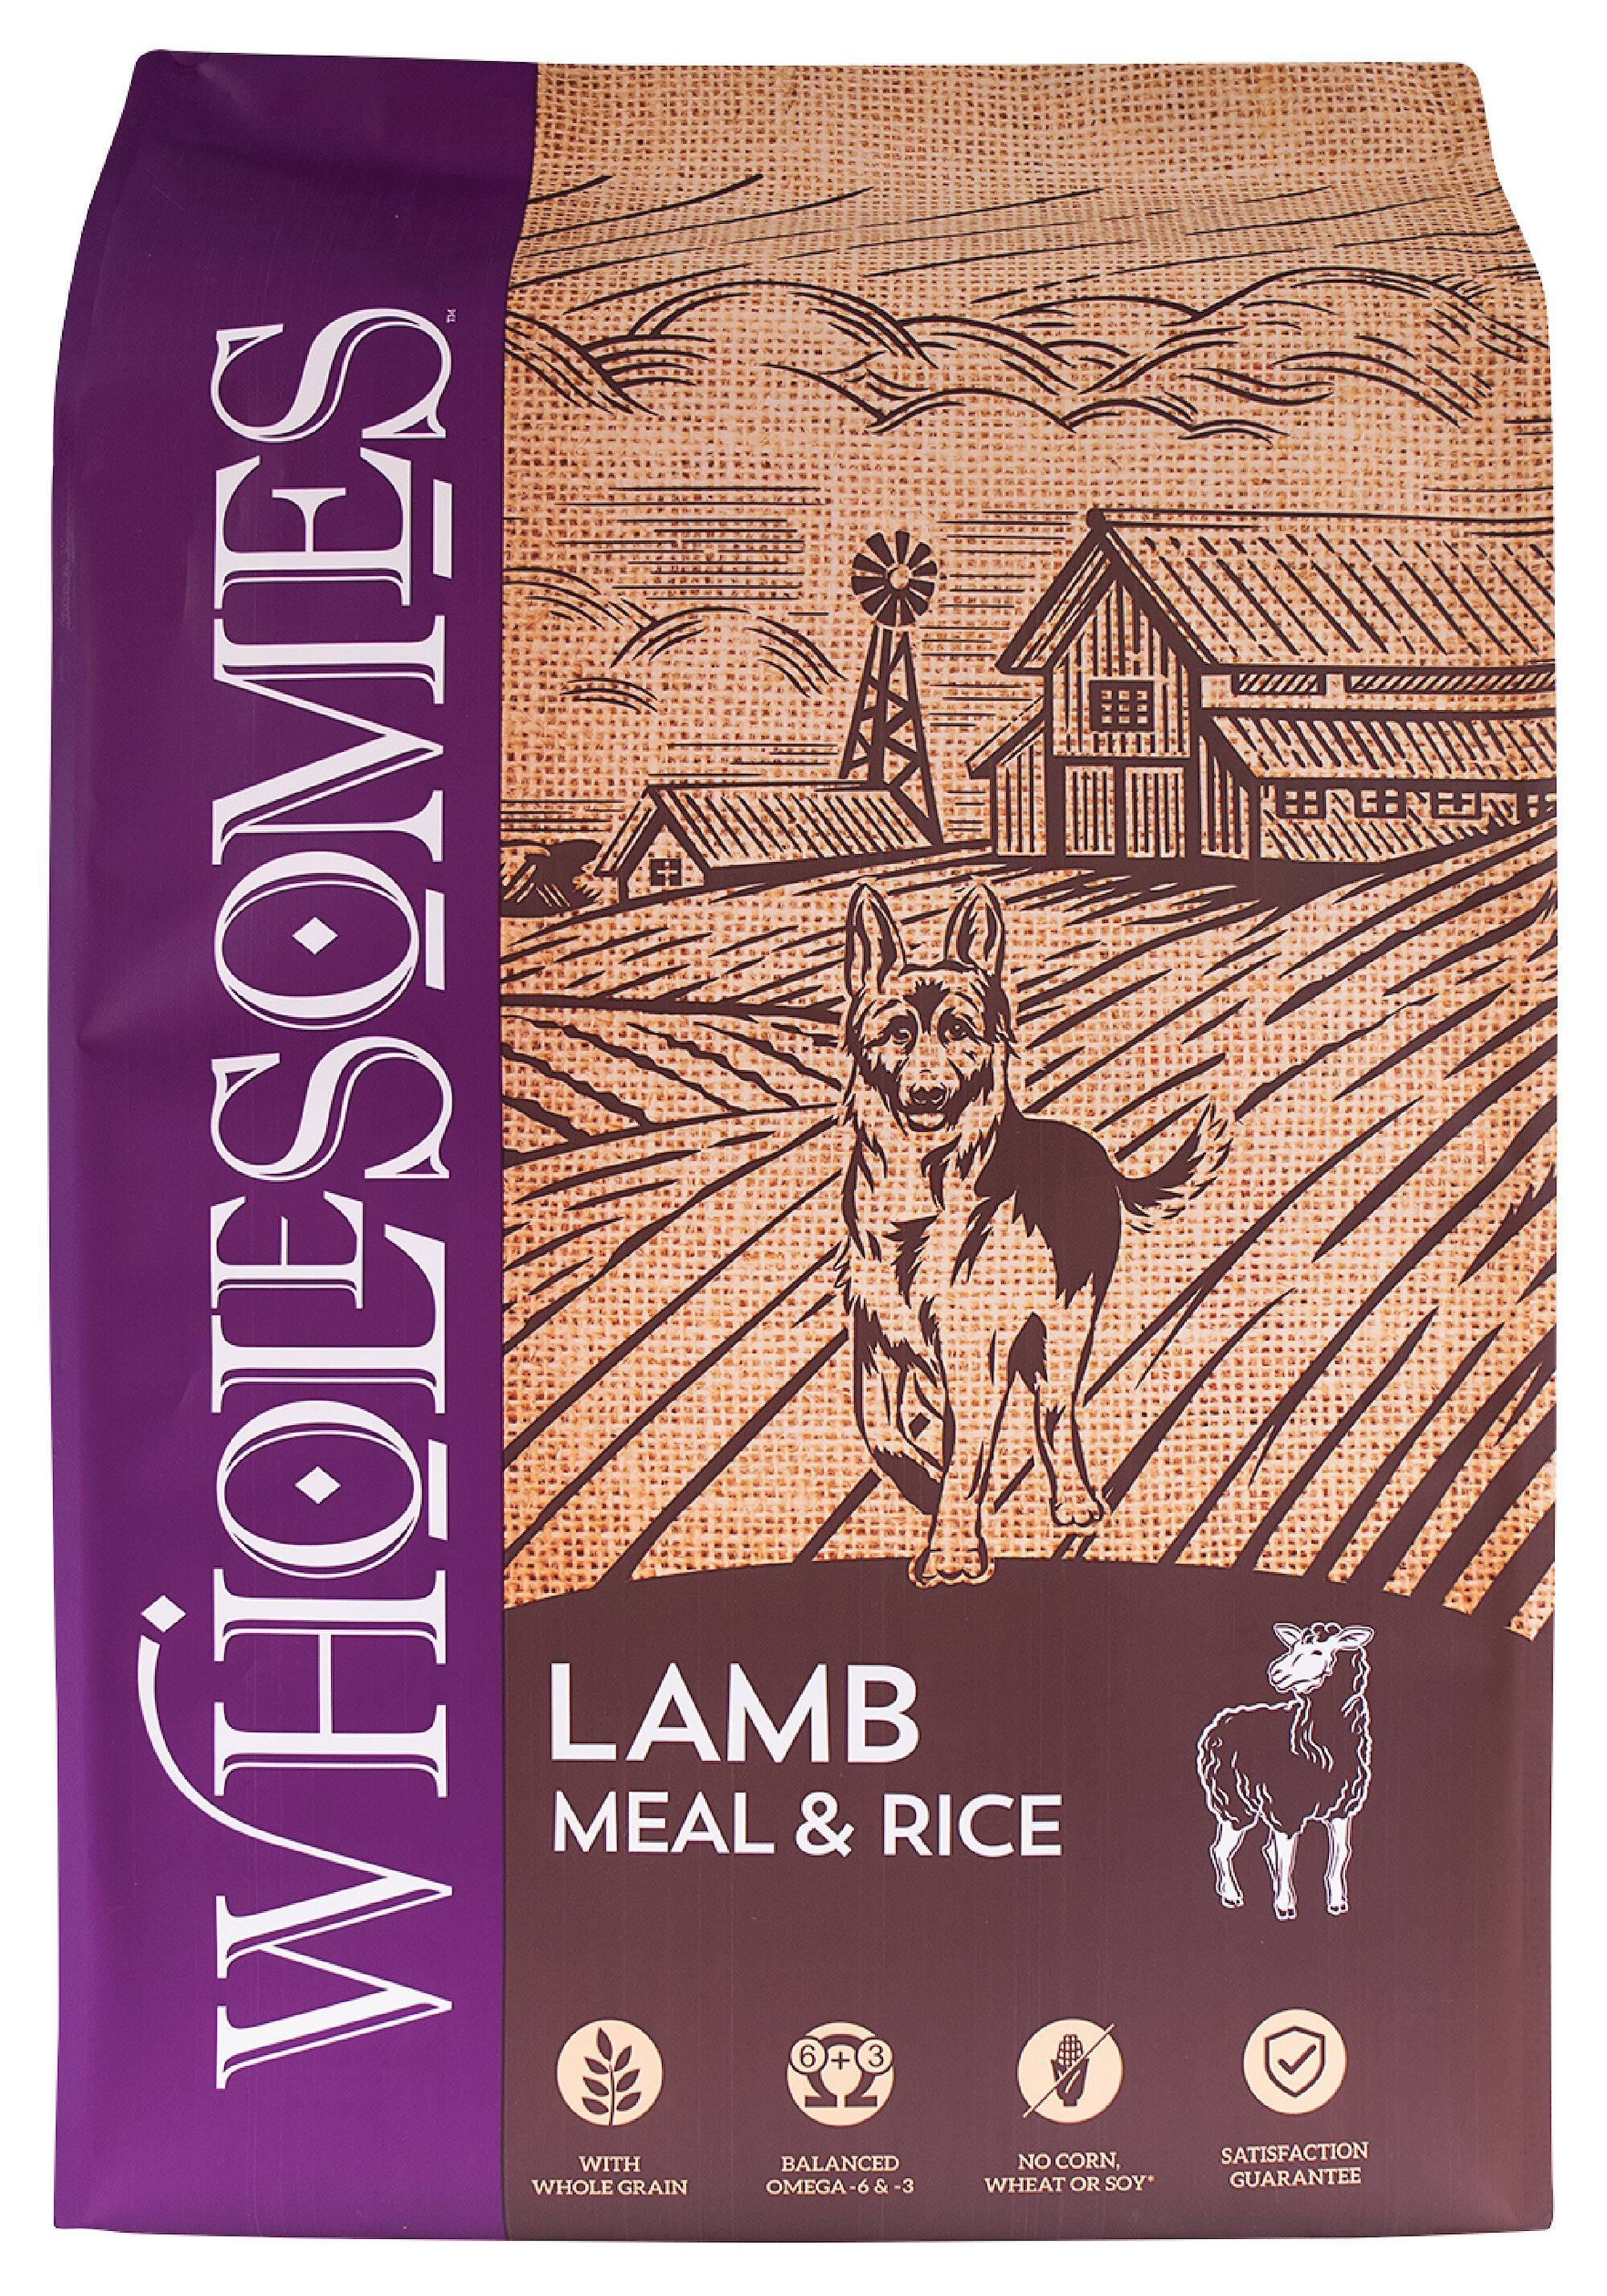 What is the rating for the lamb wholesome sportmix lamb dry dog food ...